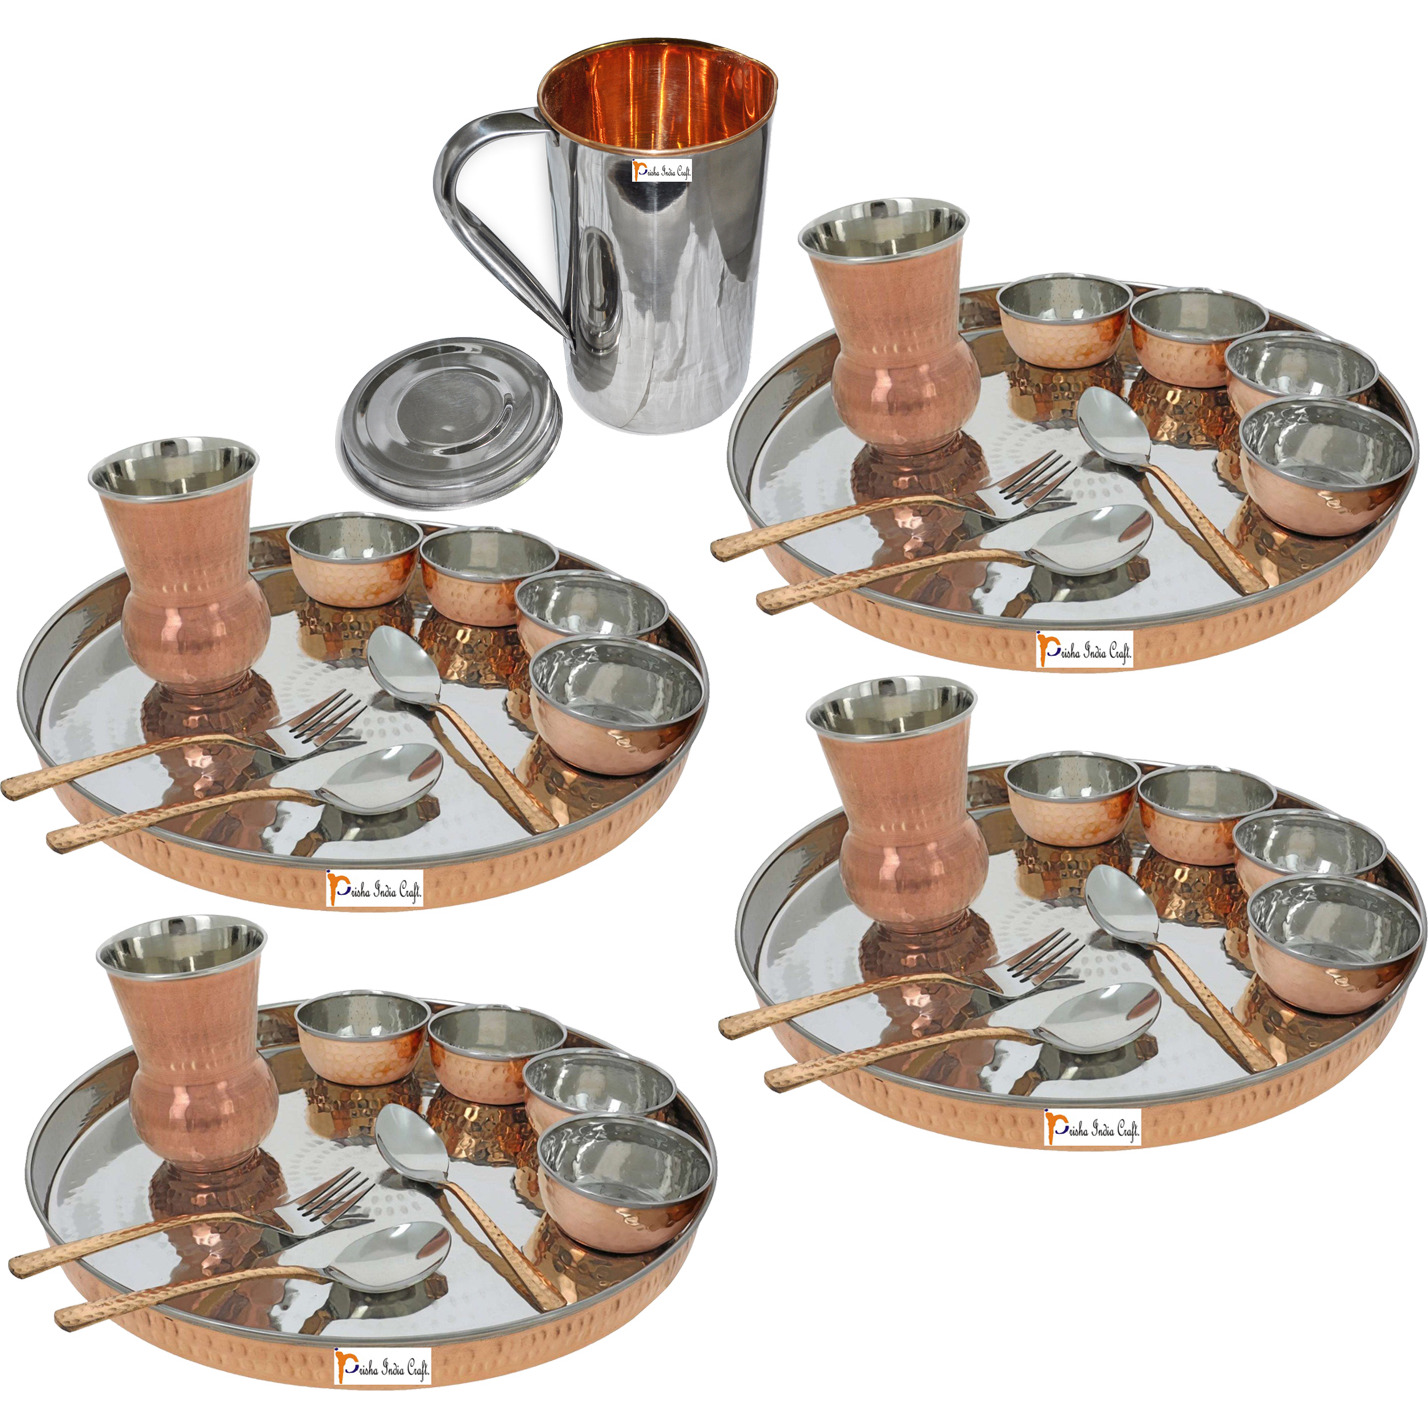 Prisha India Craft B. Set of 4 Dinnerware Traditional Stainless Steel Copper Dinner Set of Thali Plate, Bowls, Glass and Spoons, Dia 13  With 1 Stainless Steel Copper Pitcher Jug - Christmas Gift